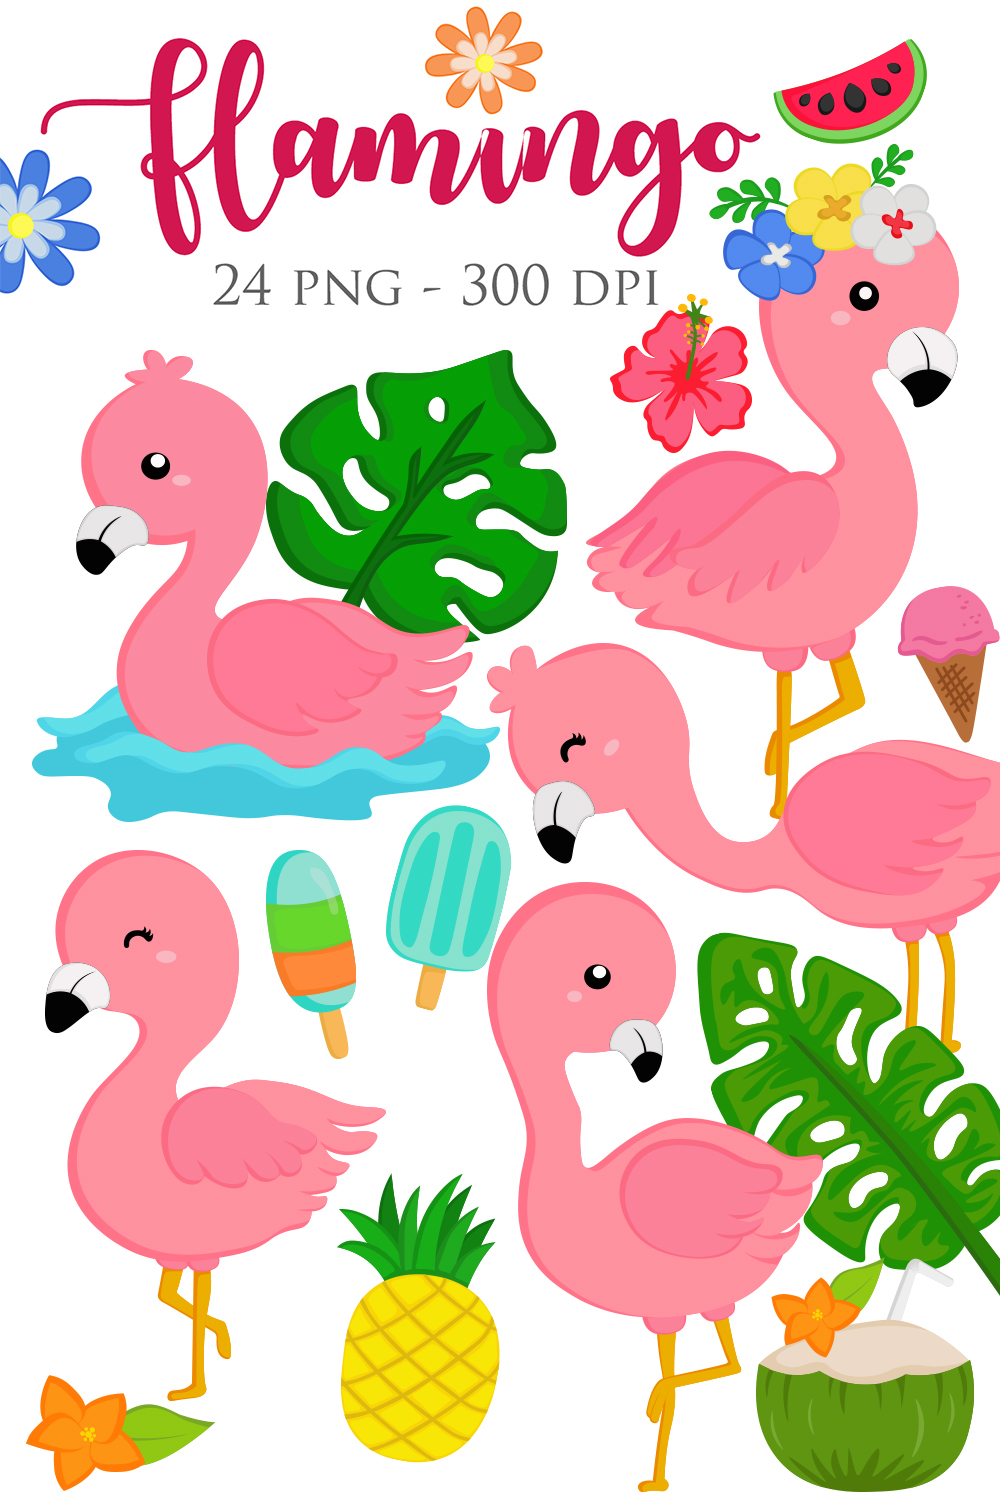 Cute Pink Flamingo Bird Animal Summer Party Nature Illustration Vector Clipart Cartoon pinterest preview image.